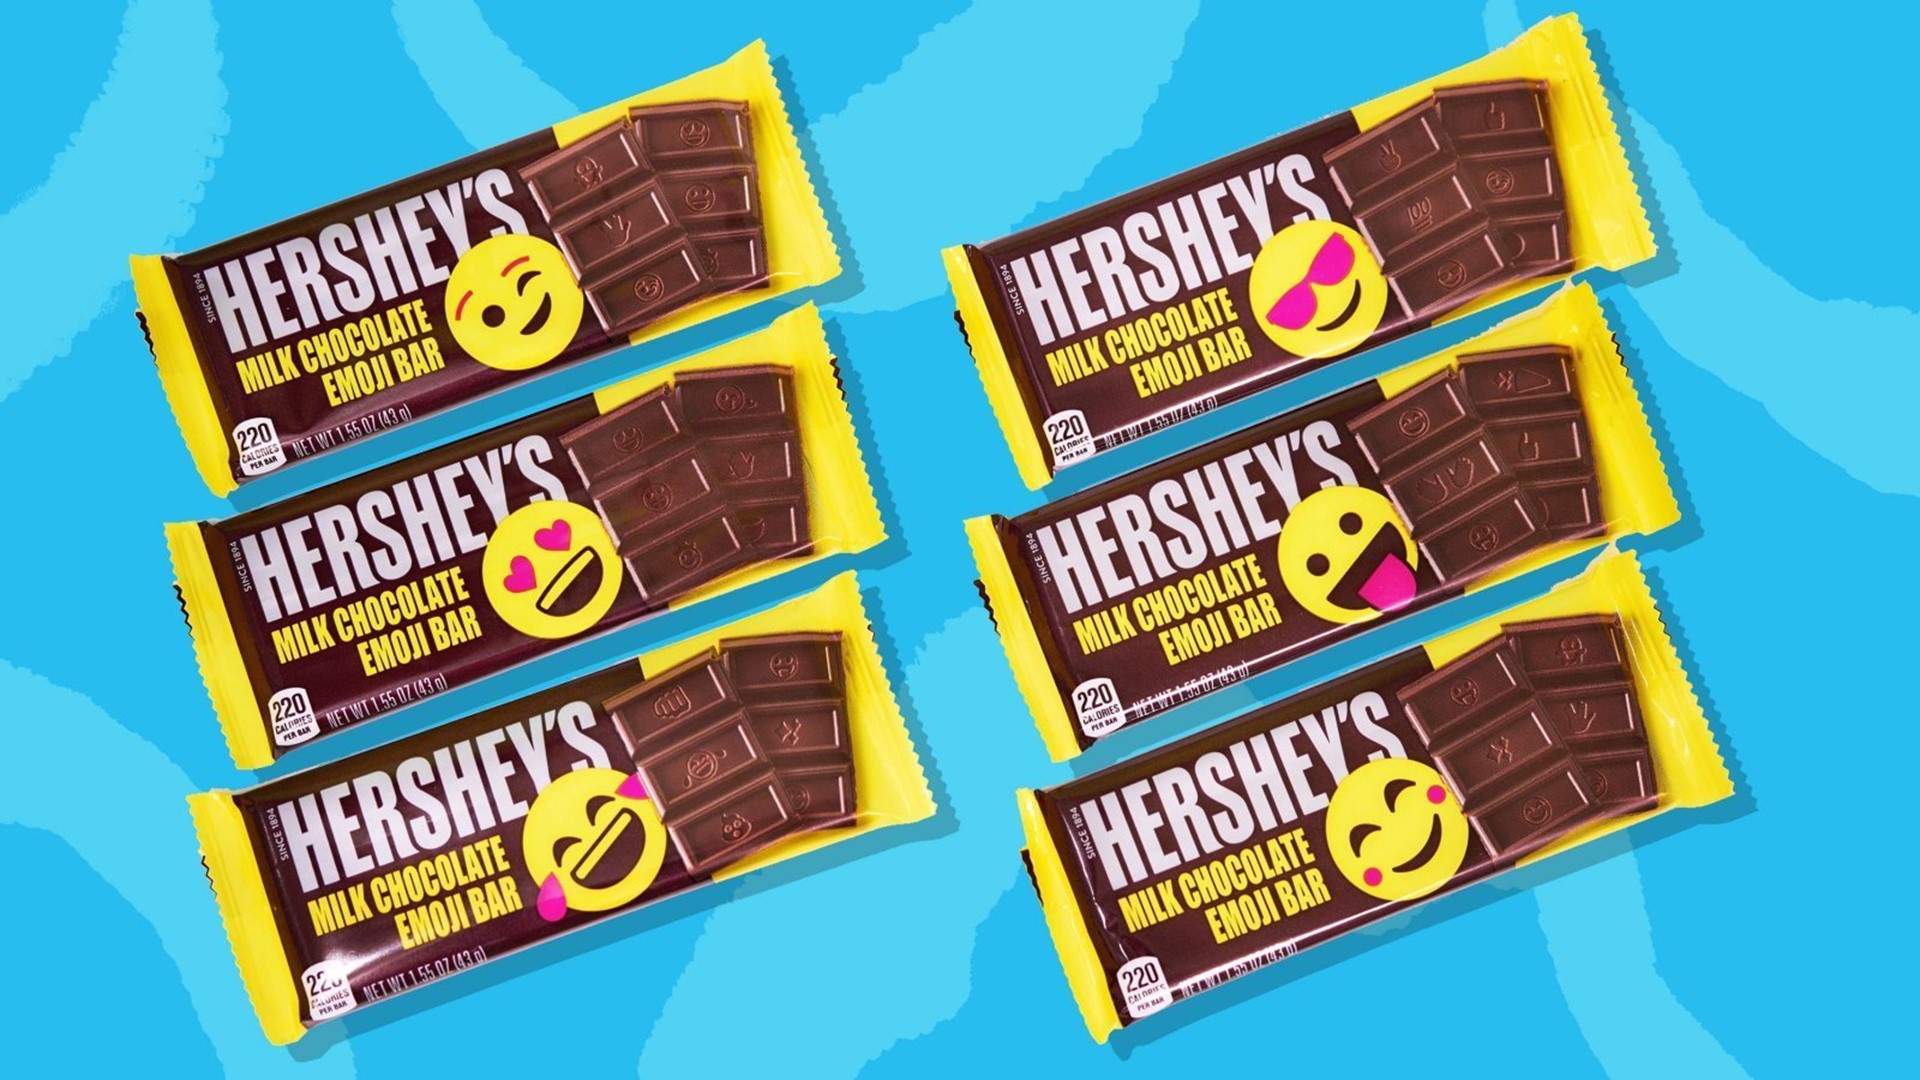 Hersheys Is Changing The Look Of Its Candy Bar For The First Time In